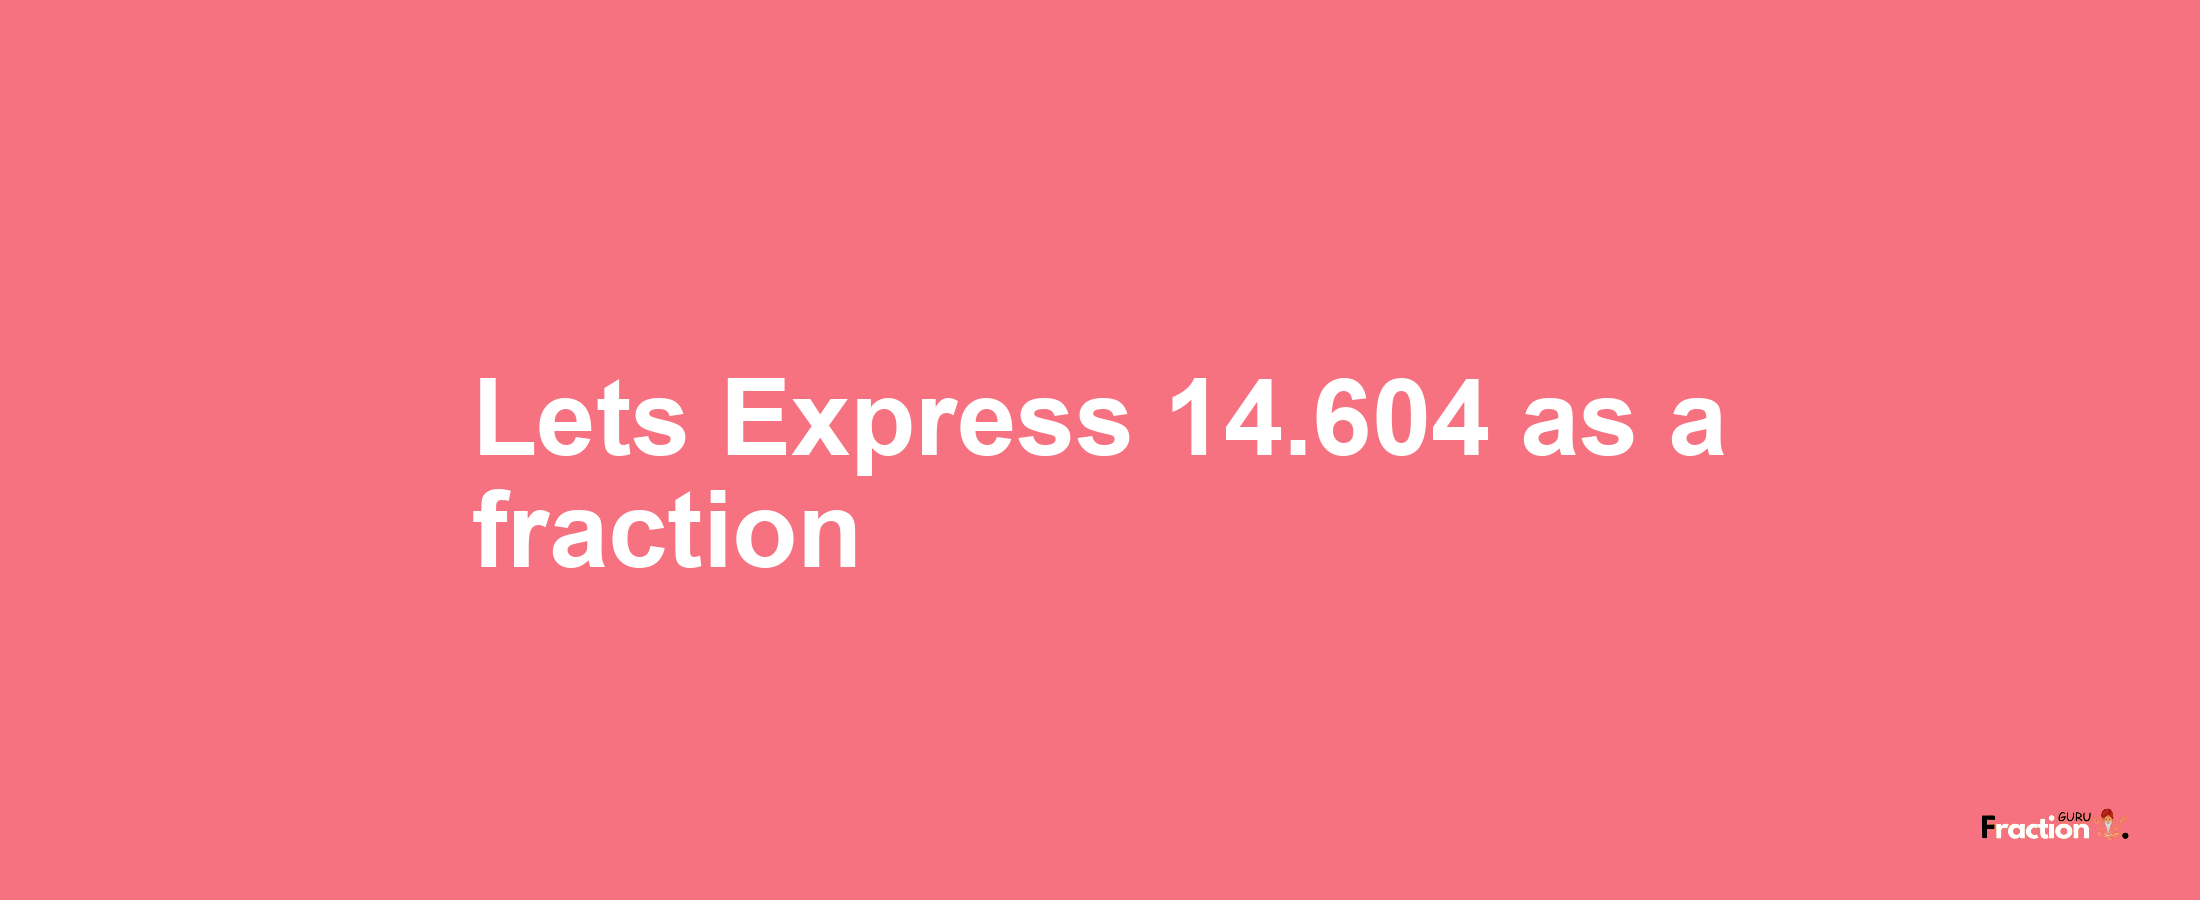 Lets Express 14.604 as afraction